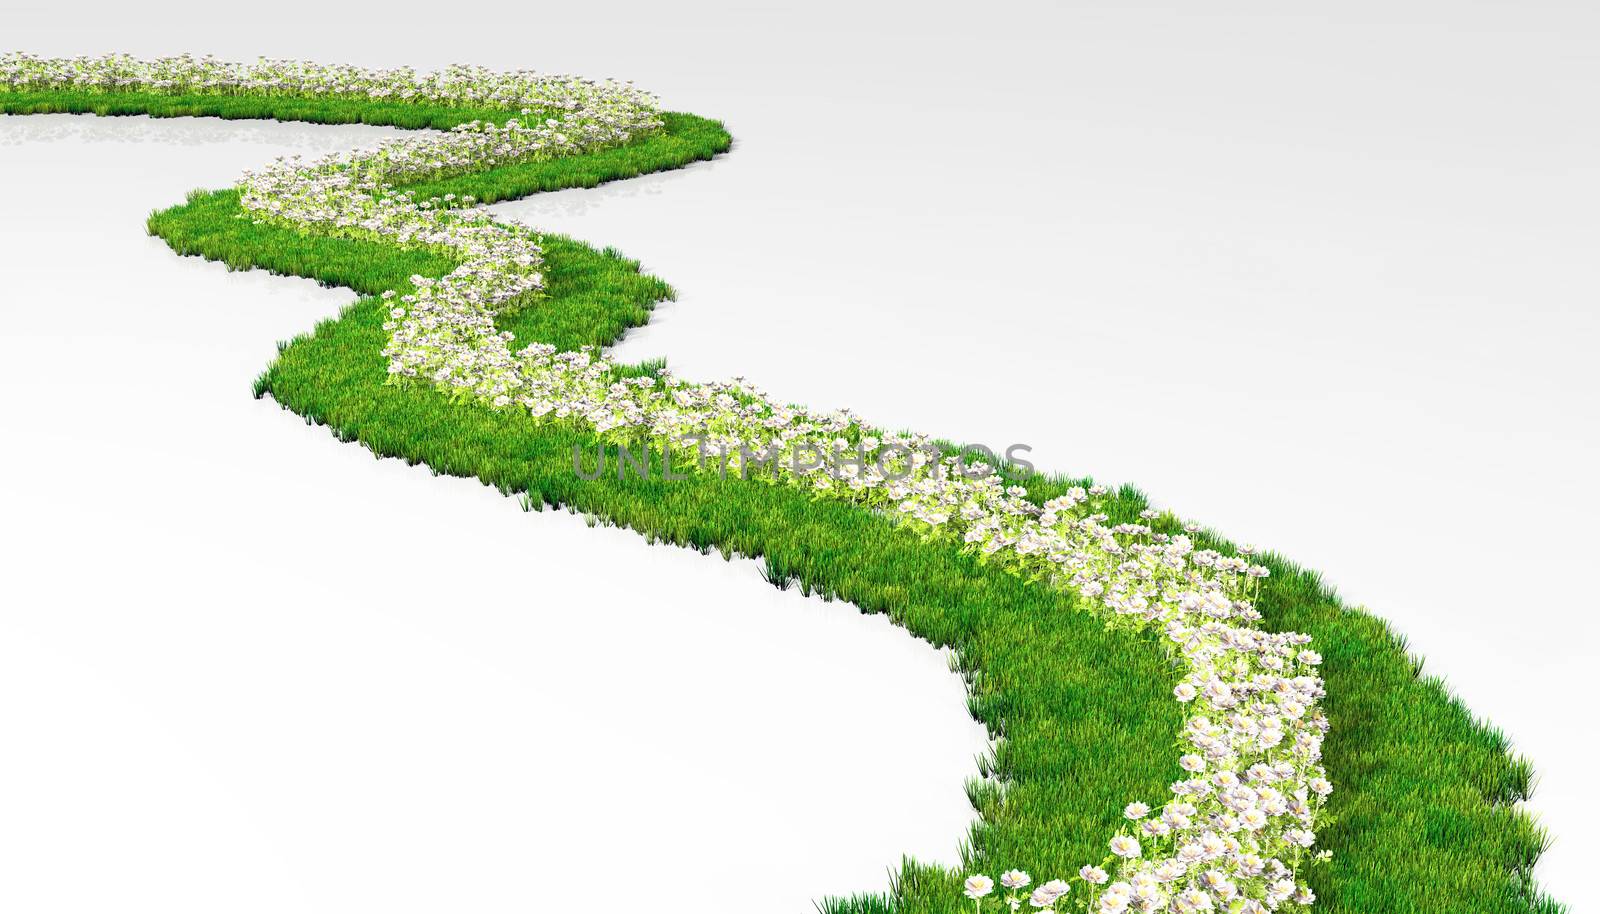 a grassy path made of lawn with white flowers in its centre, winds in a white ground